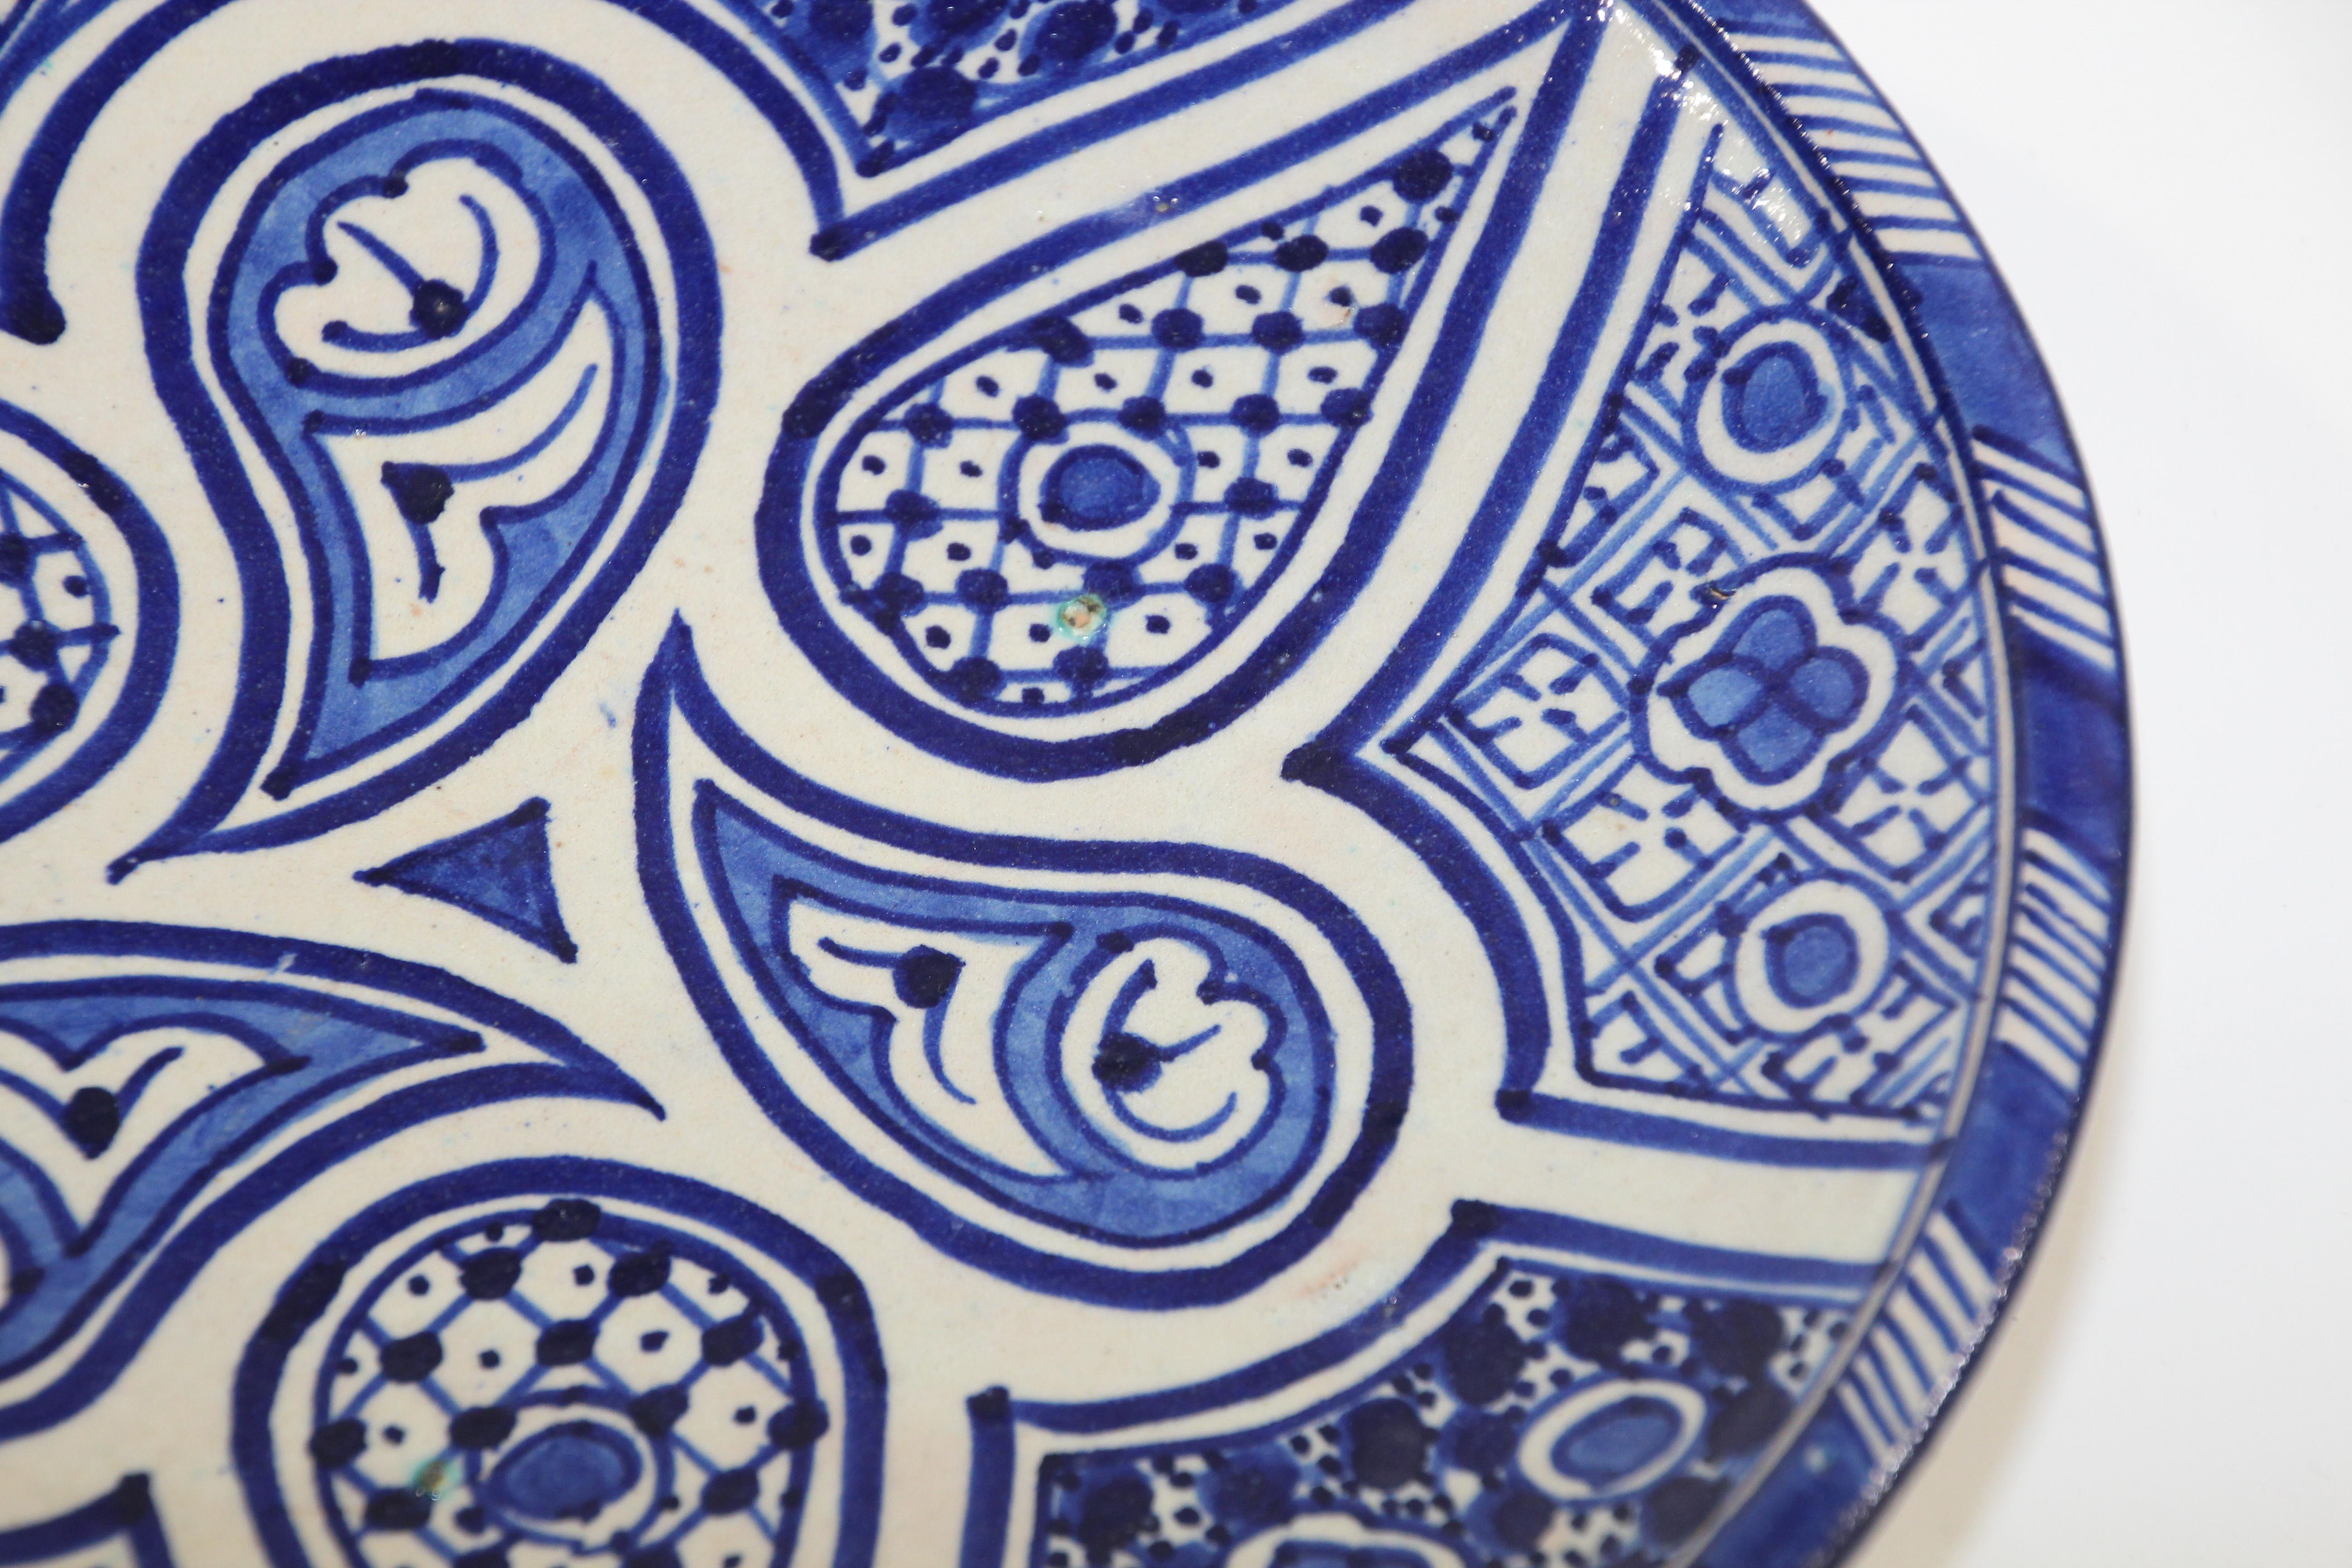 Hand-Crafted Moroccan Ceramic Plate Blue and White Handcrafted in Fez